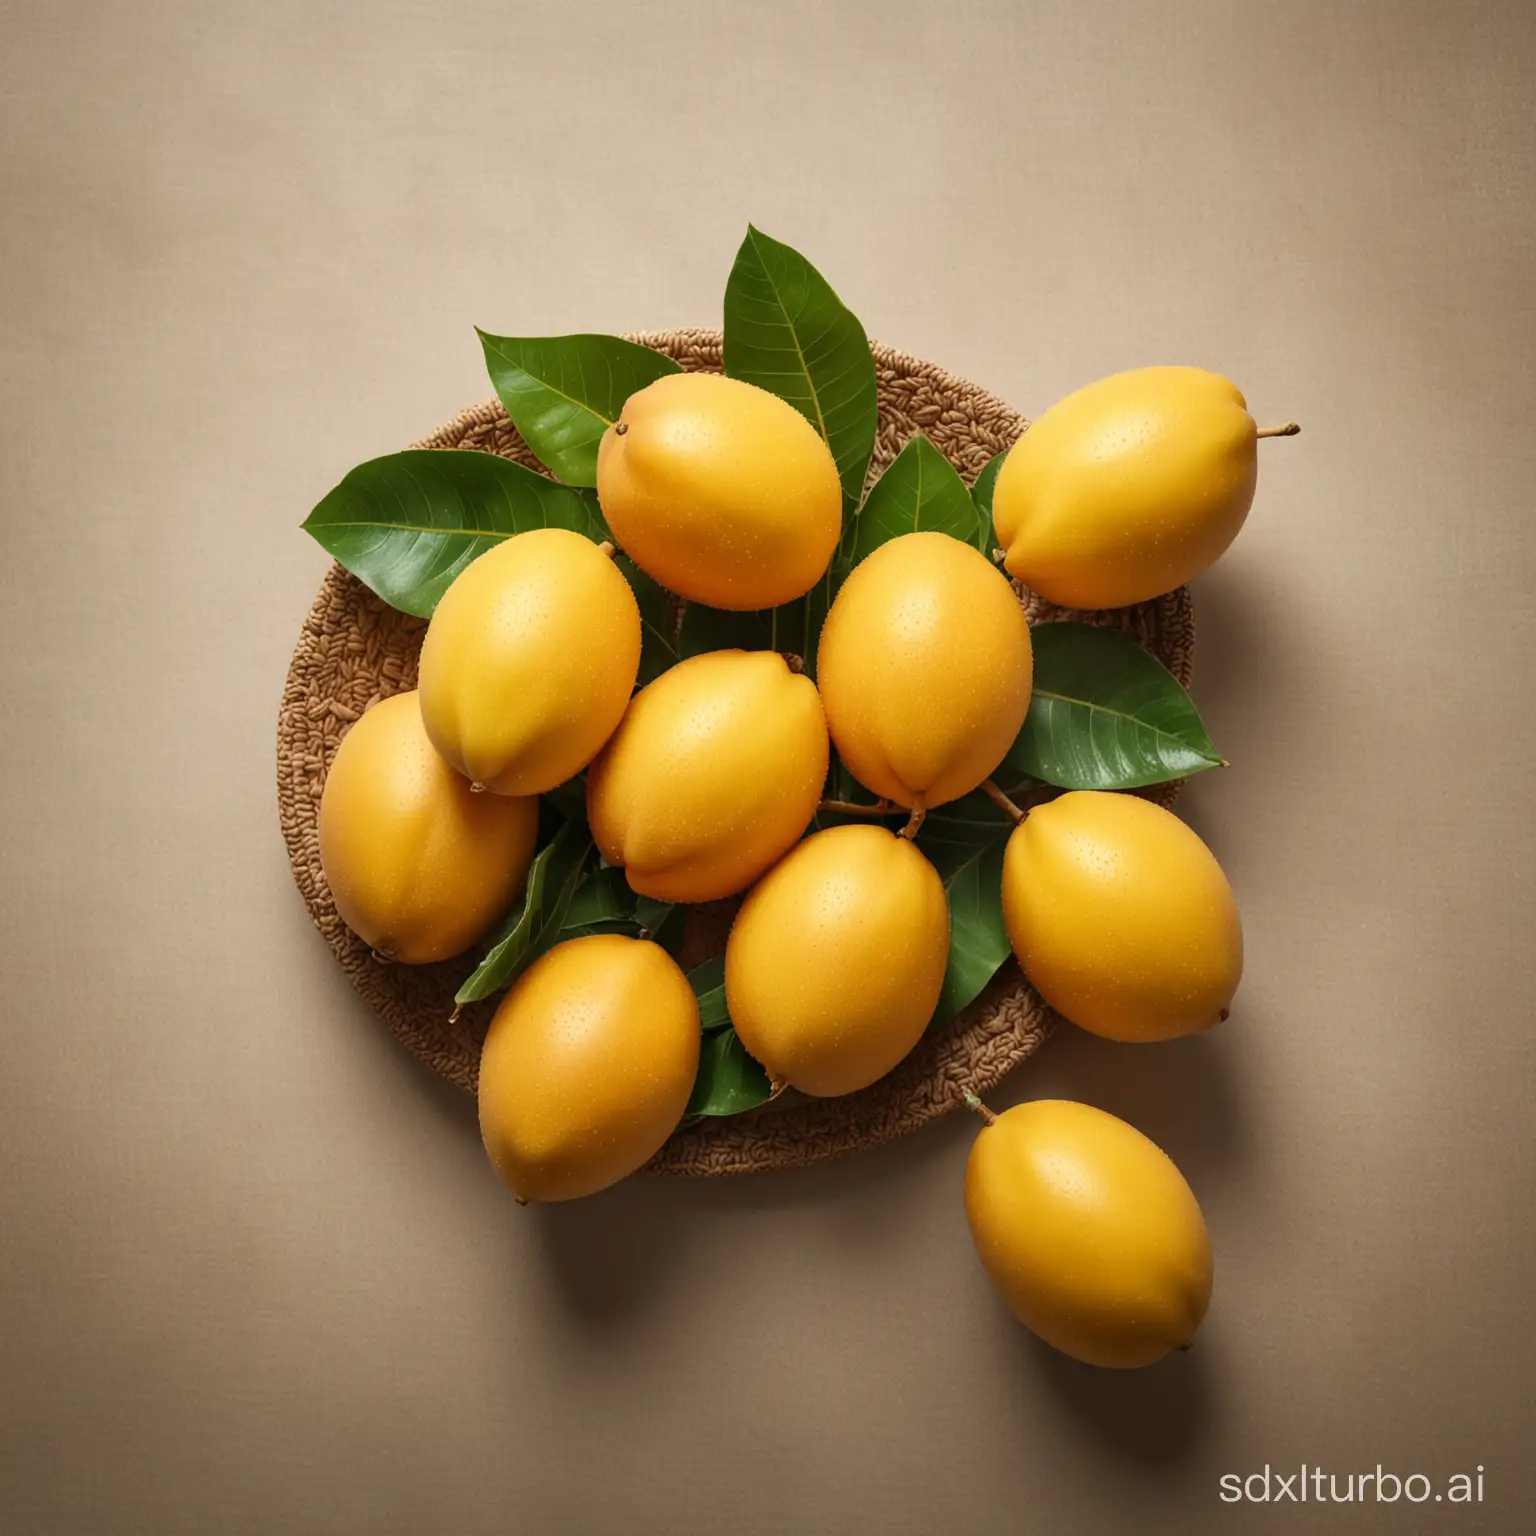 Give me an image of mangoes for business photoshoot.